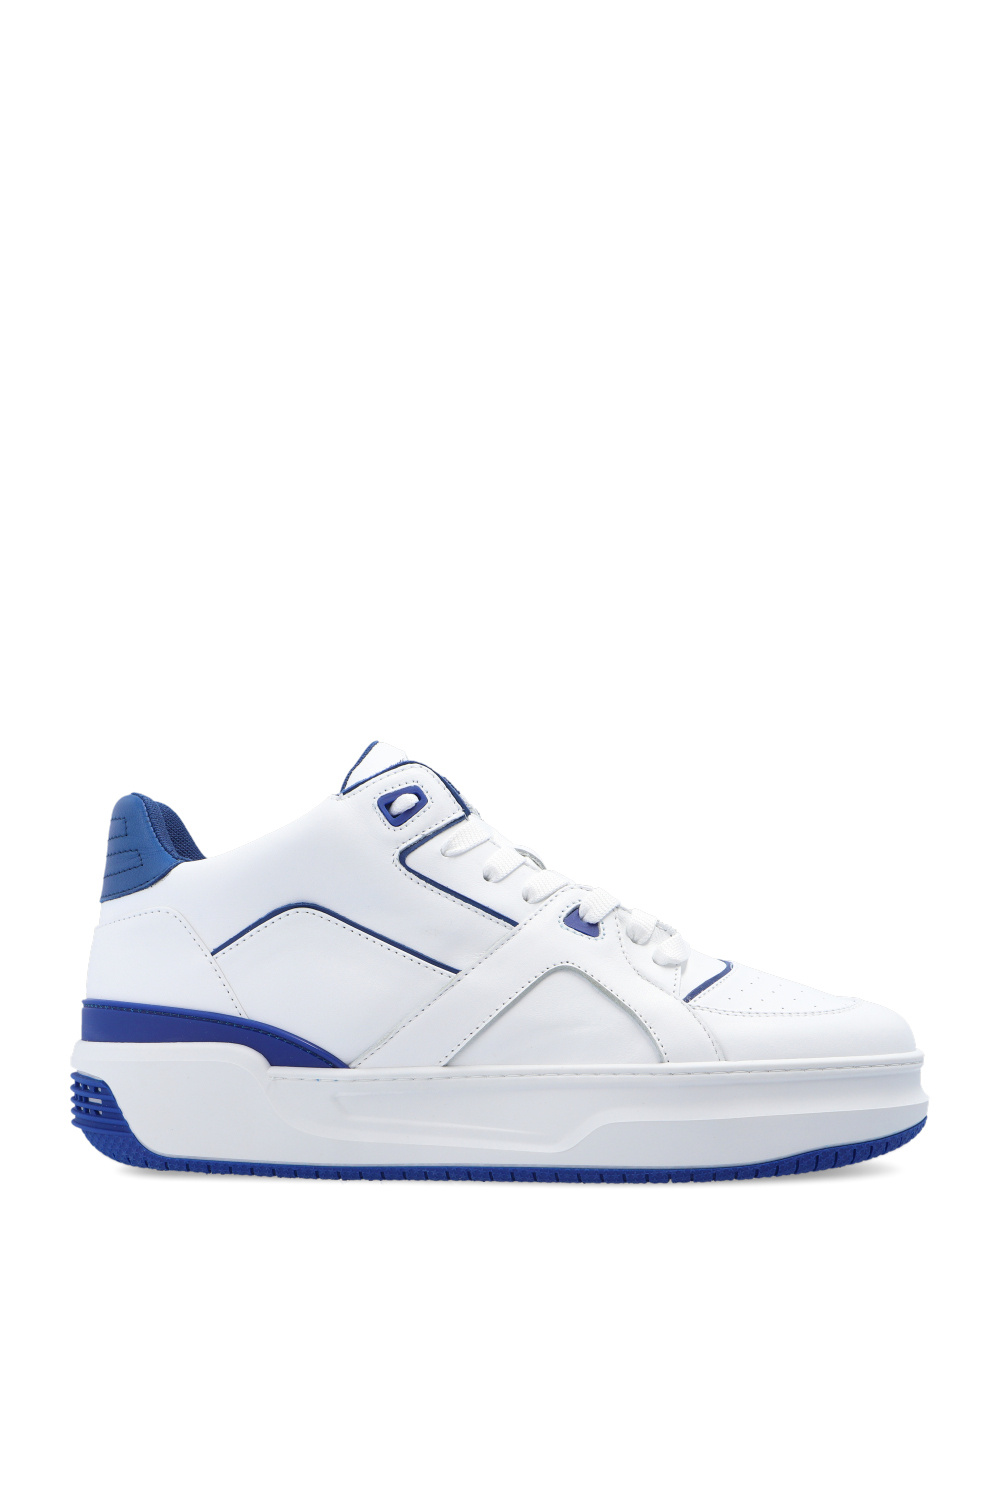 Just Don ‘Courtside Tennis Low Jd3’ sneakers | Men's Shoes | Vitkac